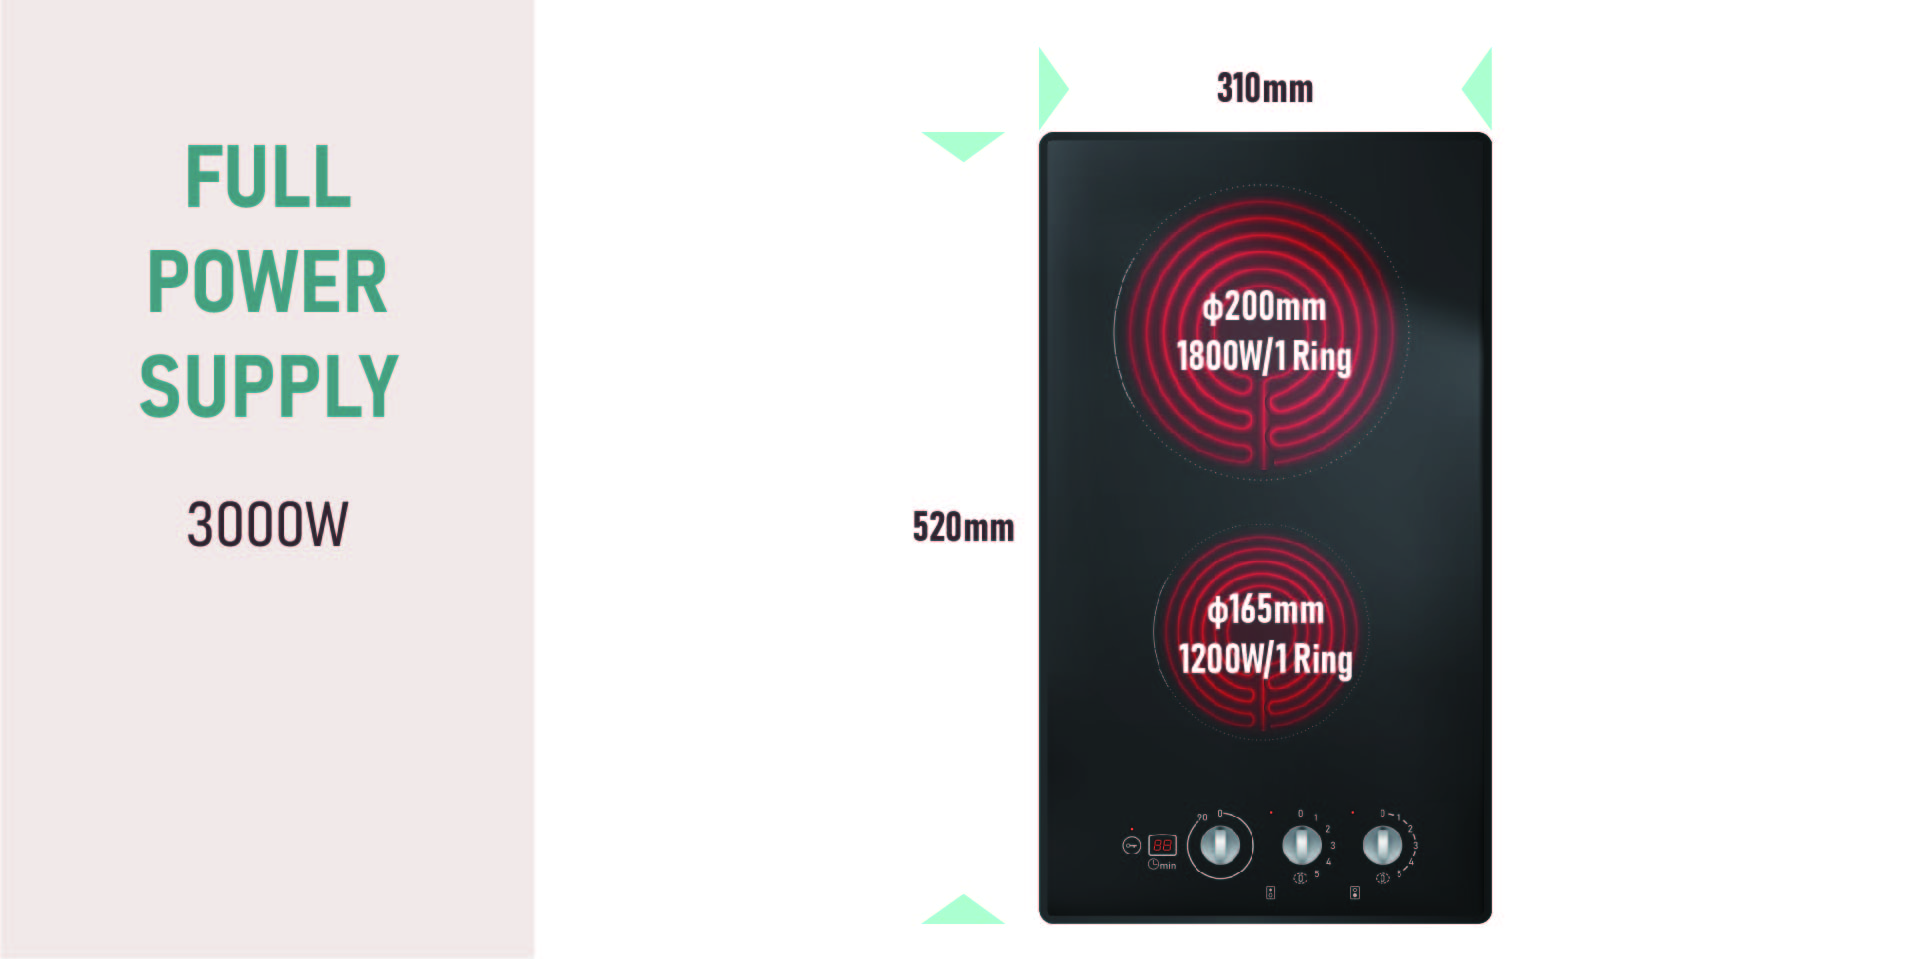 Quality 220-240V Built-in 2 Burner Electric Cooktop with Knob Control 3000W Hard Wired No Plug Manufacturer | เหลา